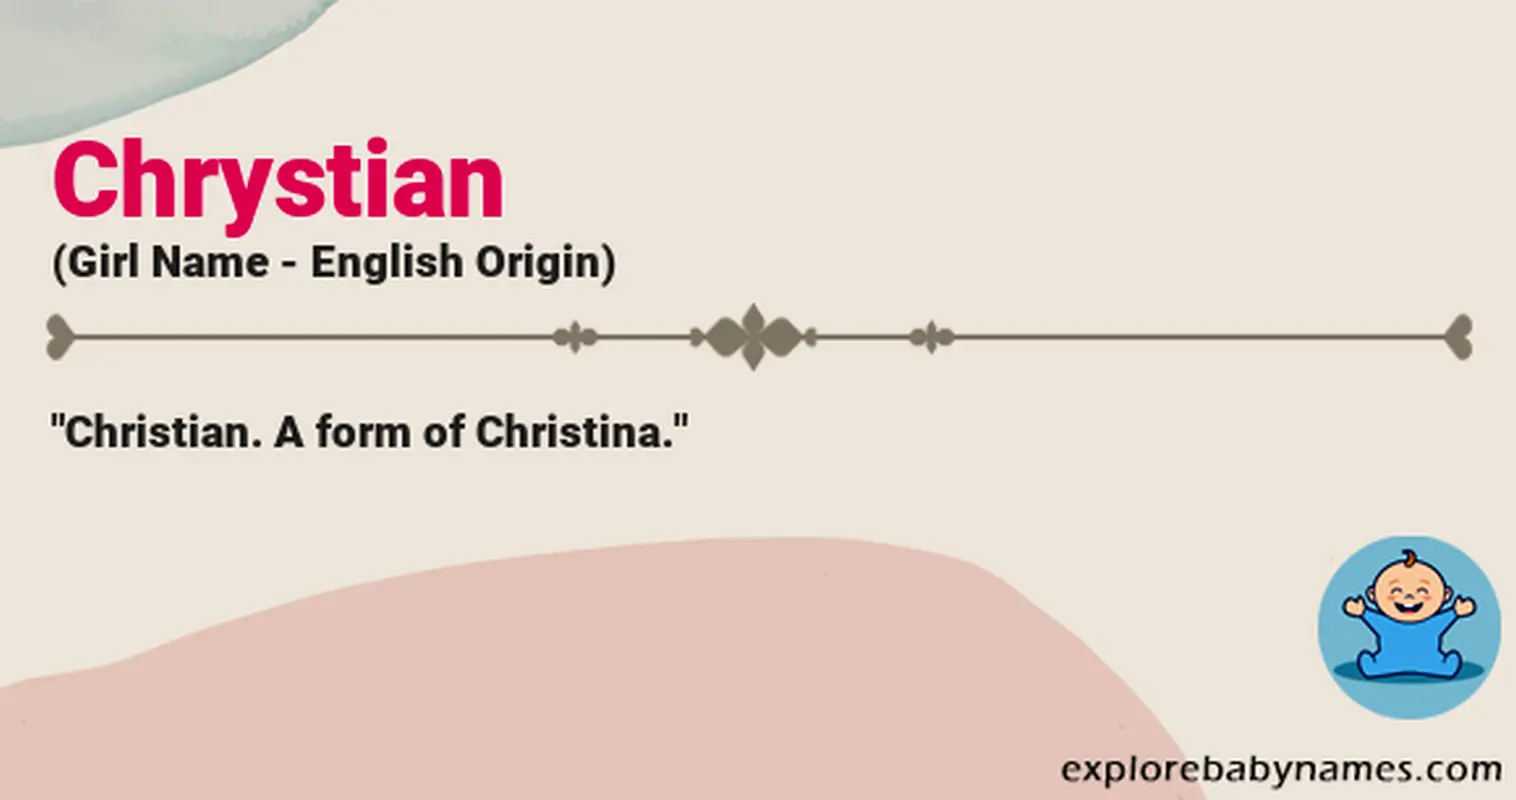 Meaning of Chrystian